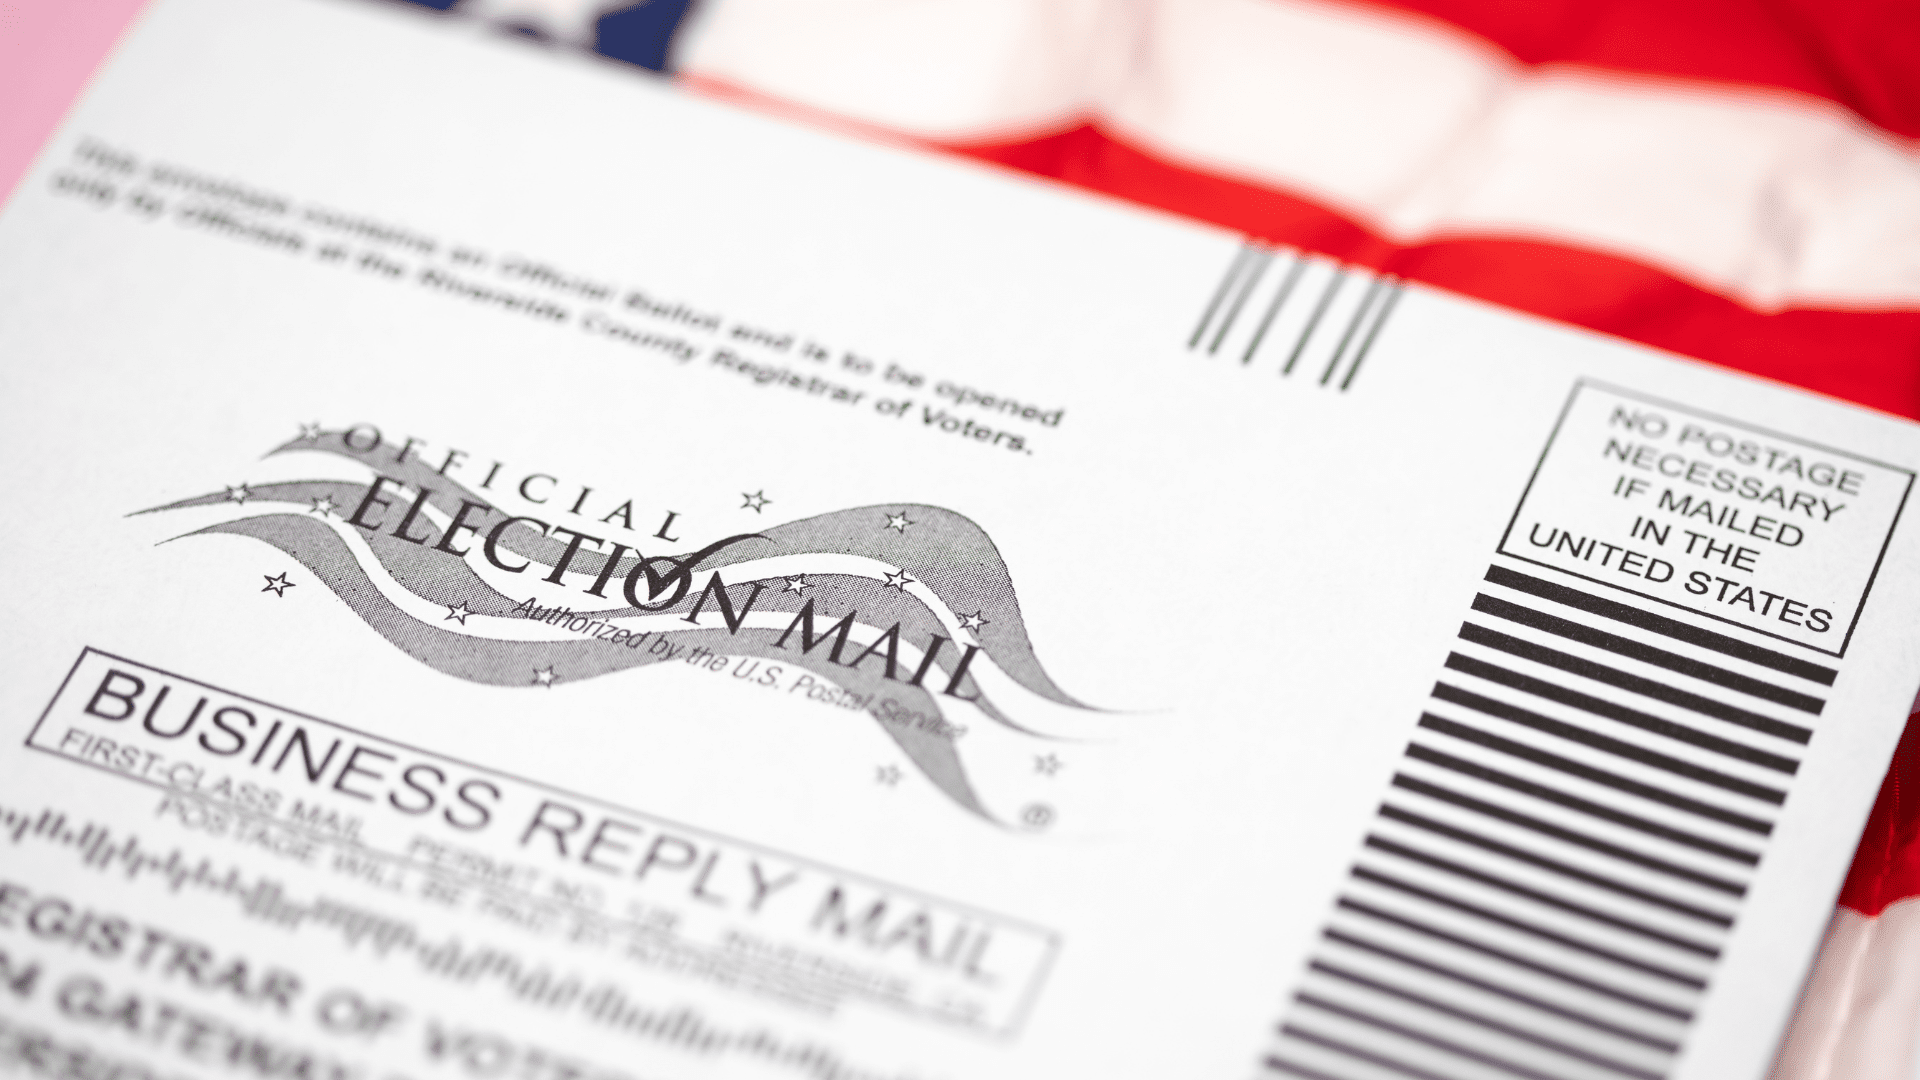 Featured image for “Is mail-in voting unconstitutional? Chancery judge to decide”